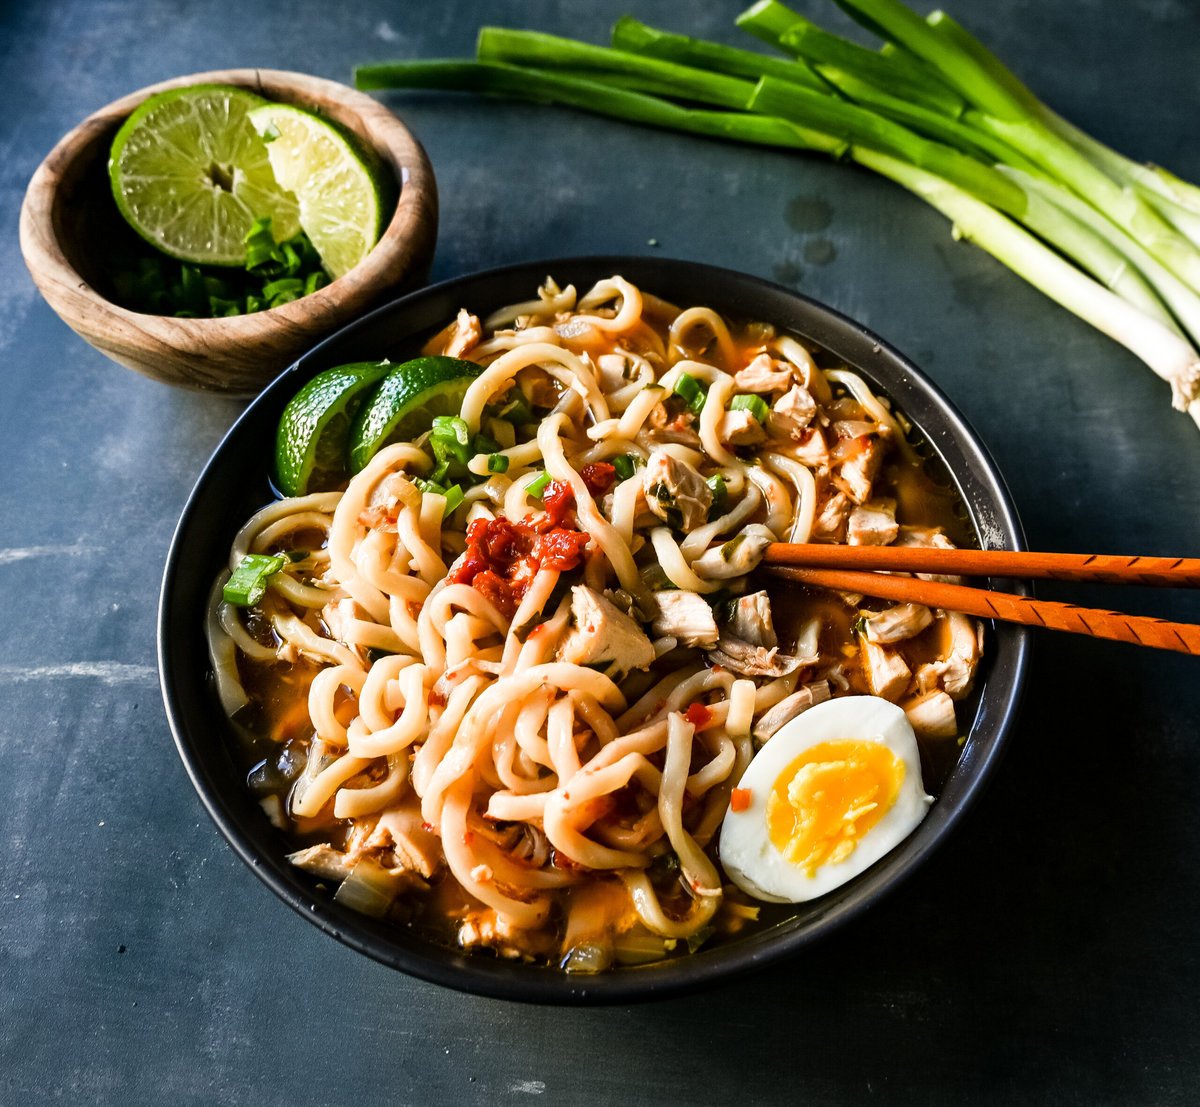 Homemade Chicken Ramen. This warm, comforting bowl of homemade chicken ramen is made with tender chicken, noodles, vegetables, in a perfectly spiced flavorful broth.